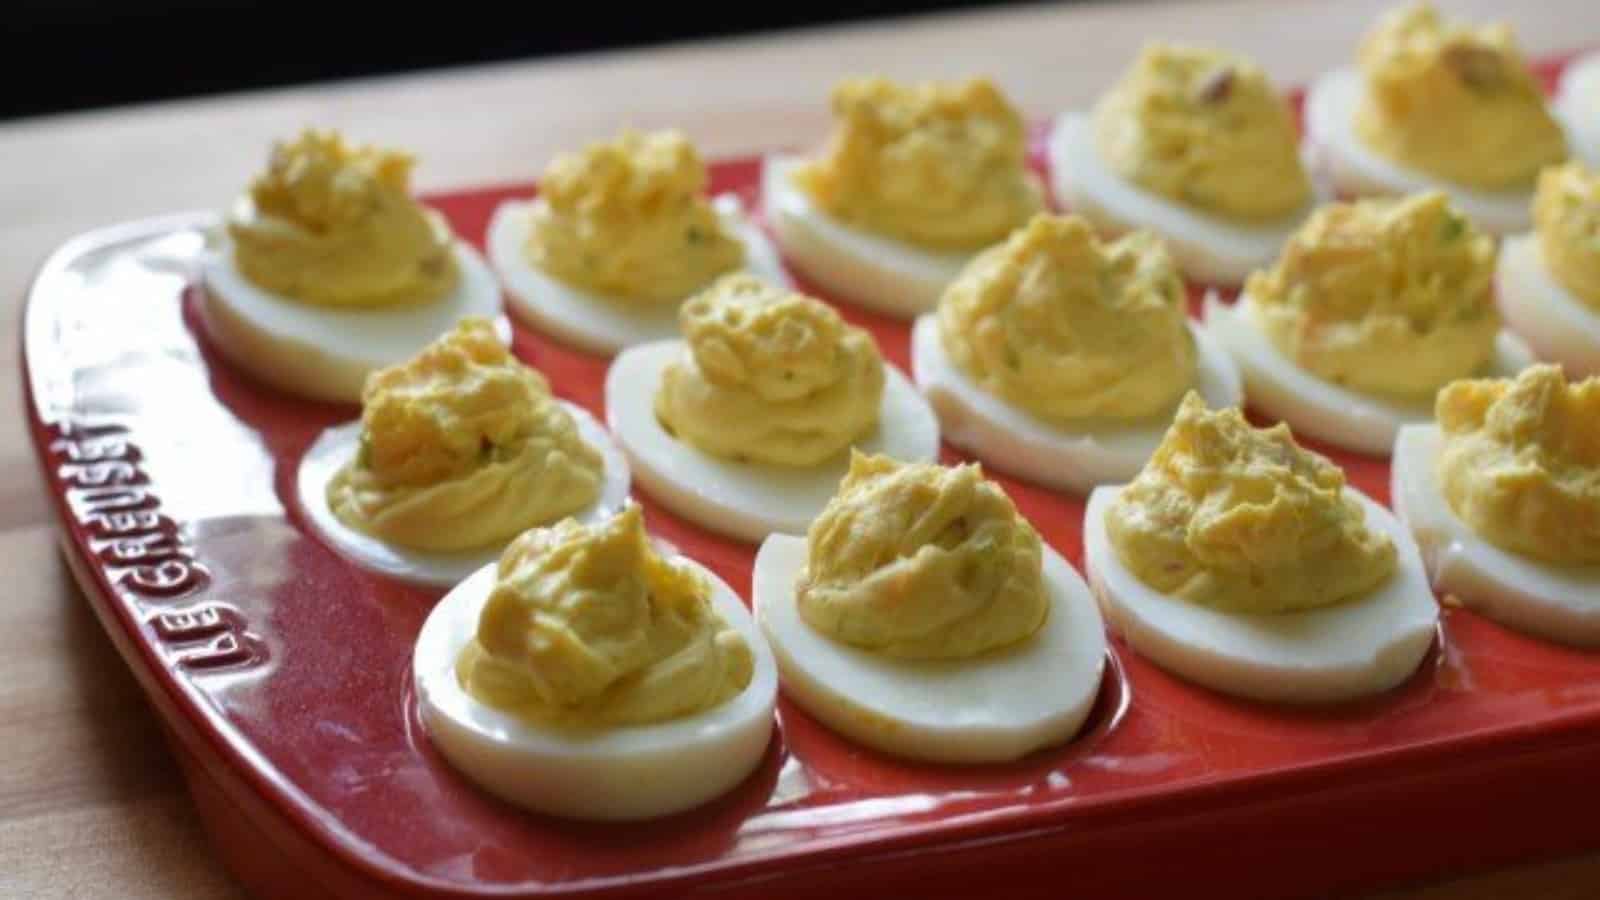 Bacon deviled eggs in a red platter.